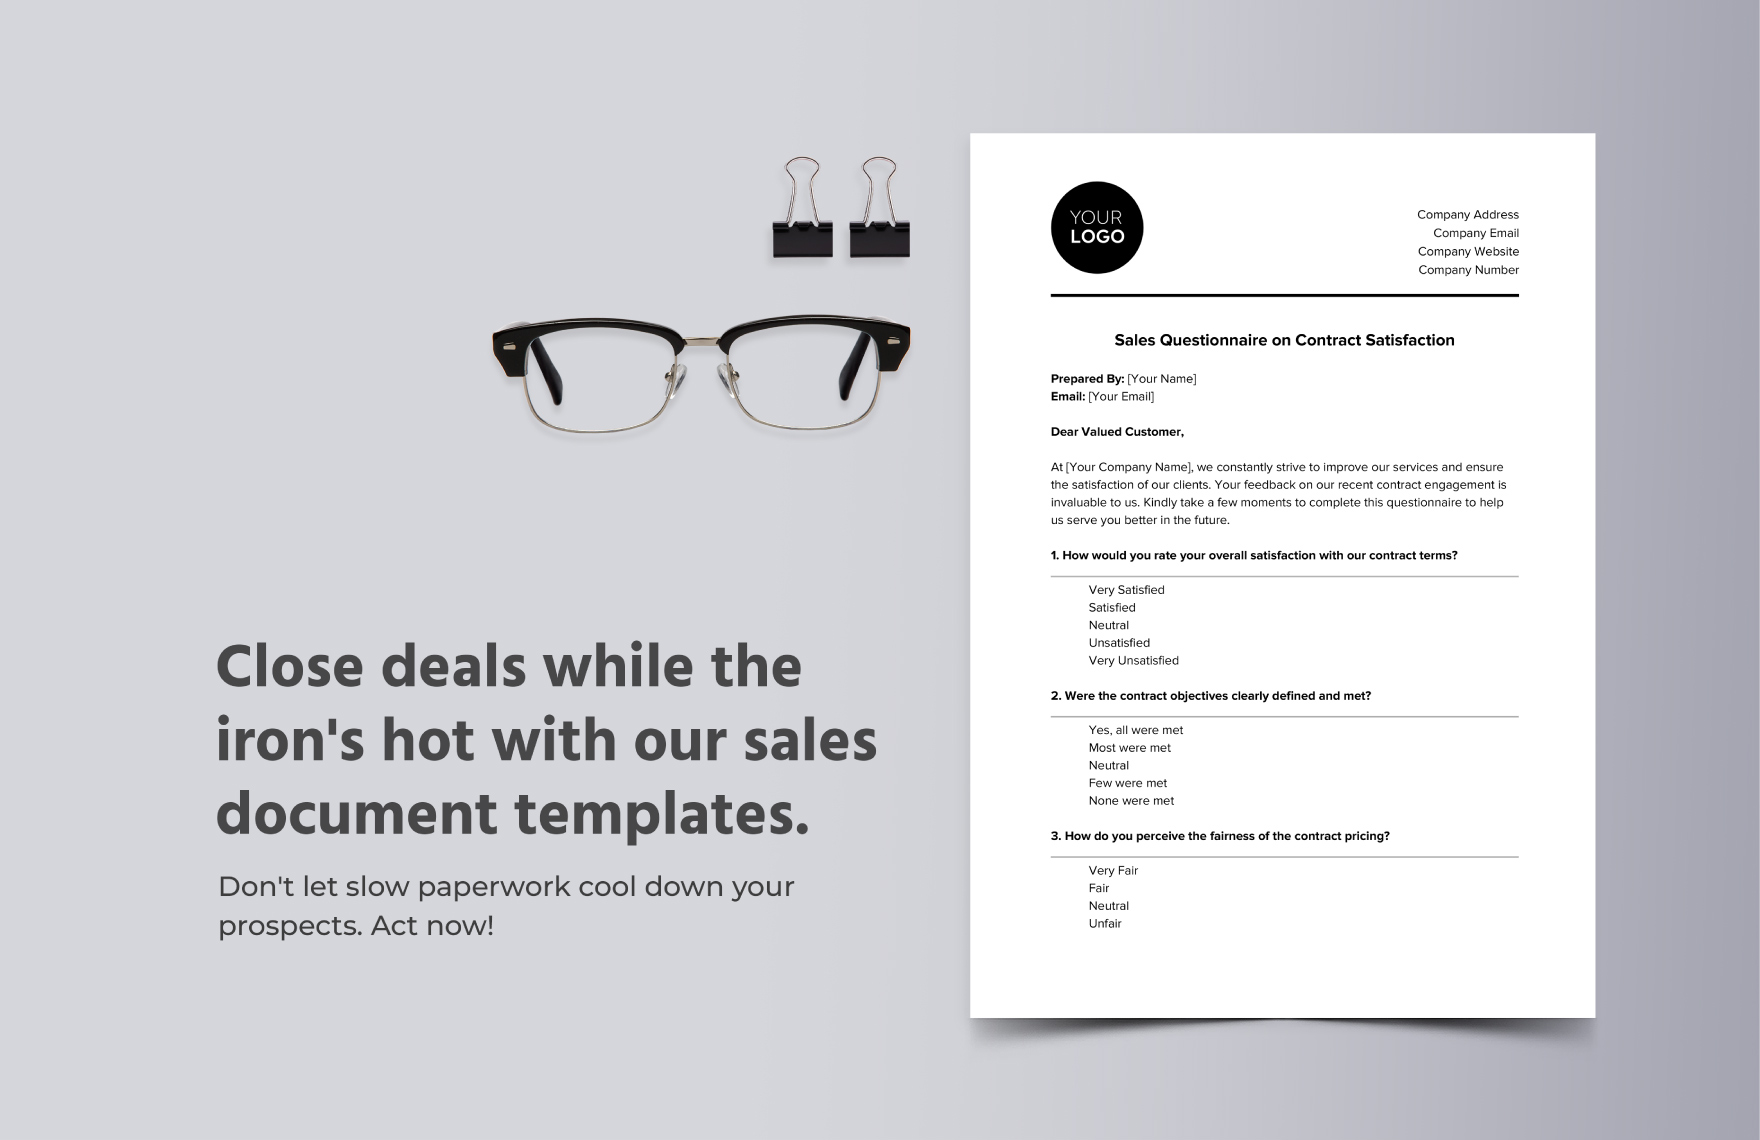 Sales Questionnaire on Contract Satisfaction Template